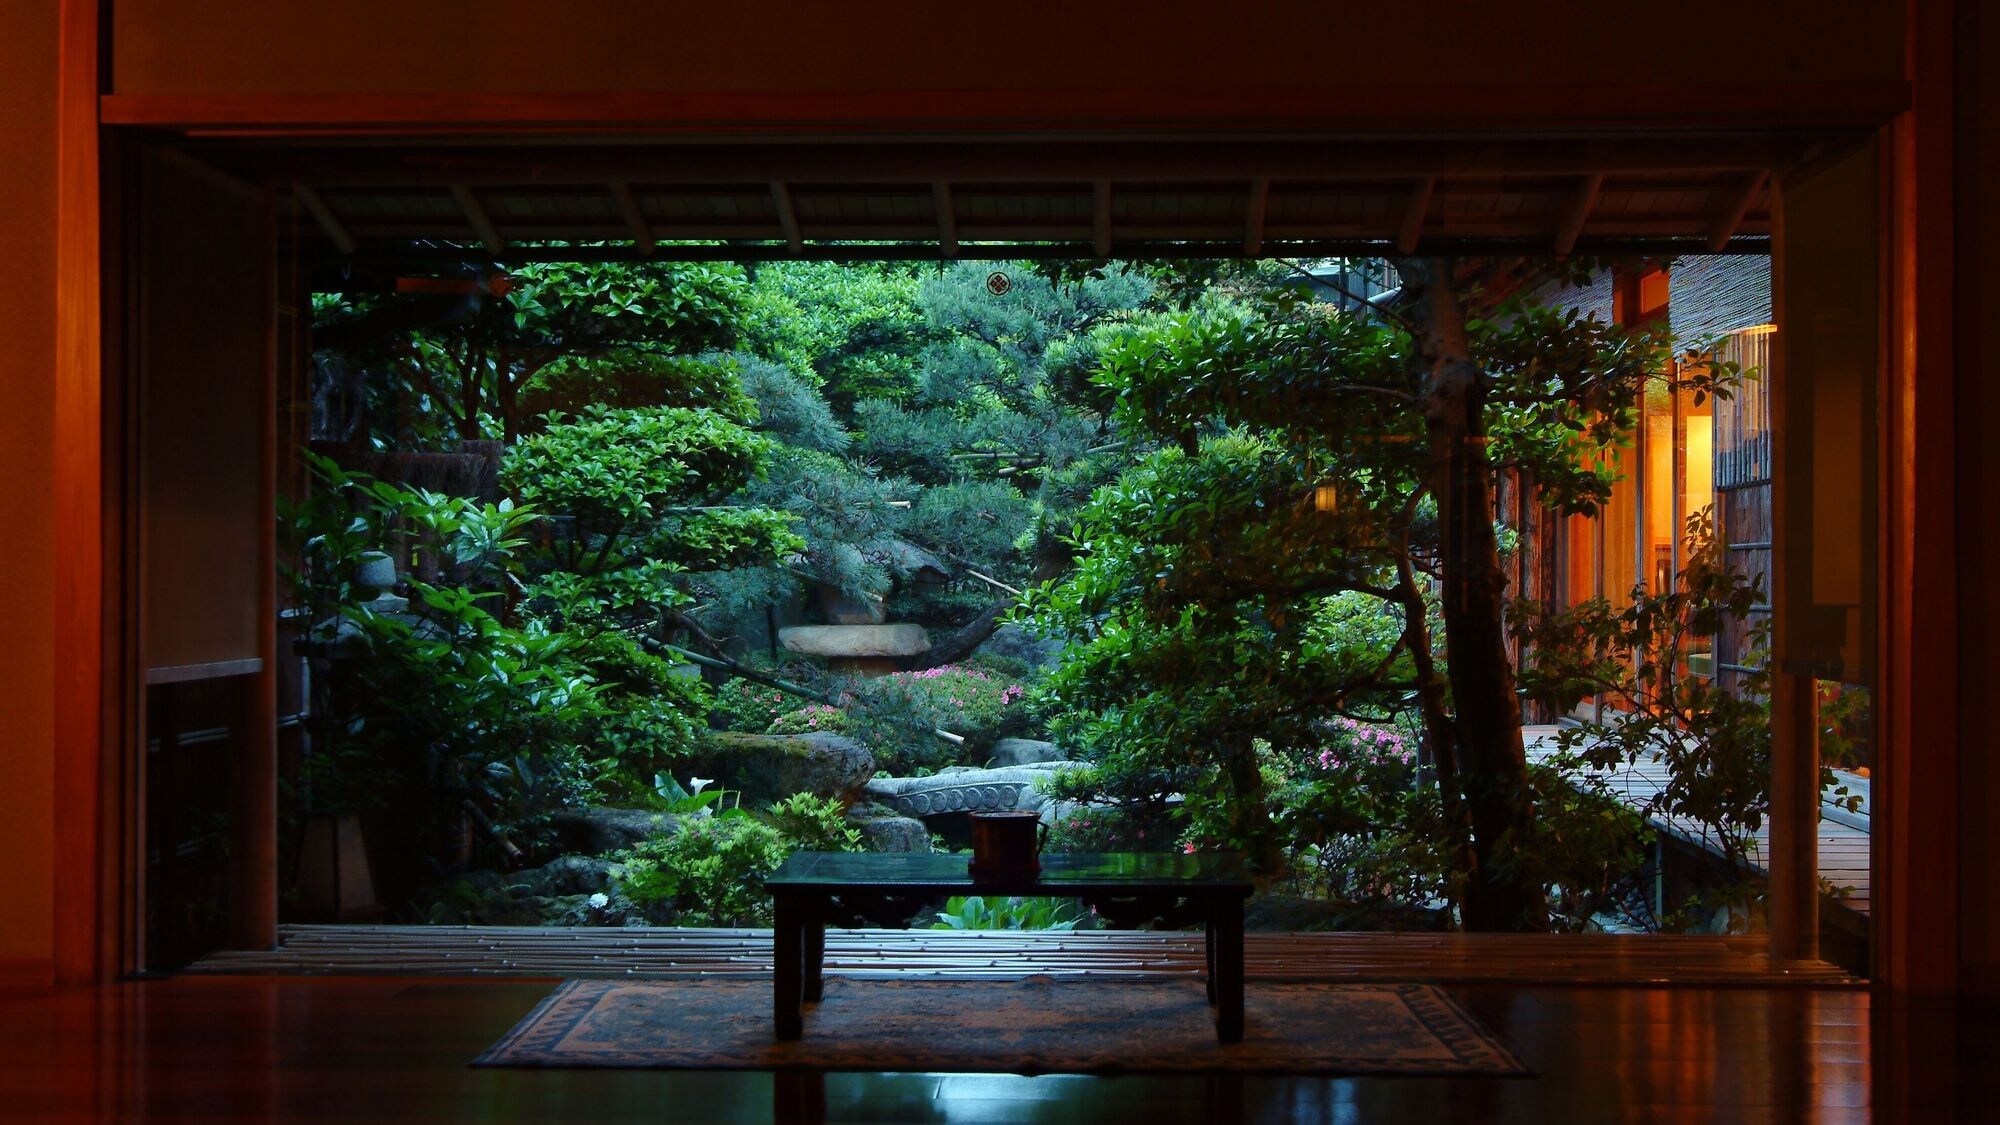 A Japanese garden with a moist and calm atmosphere seen from the lobby